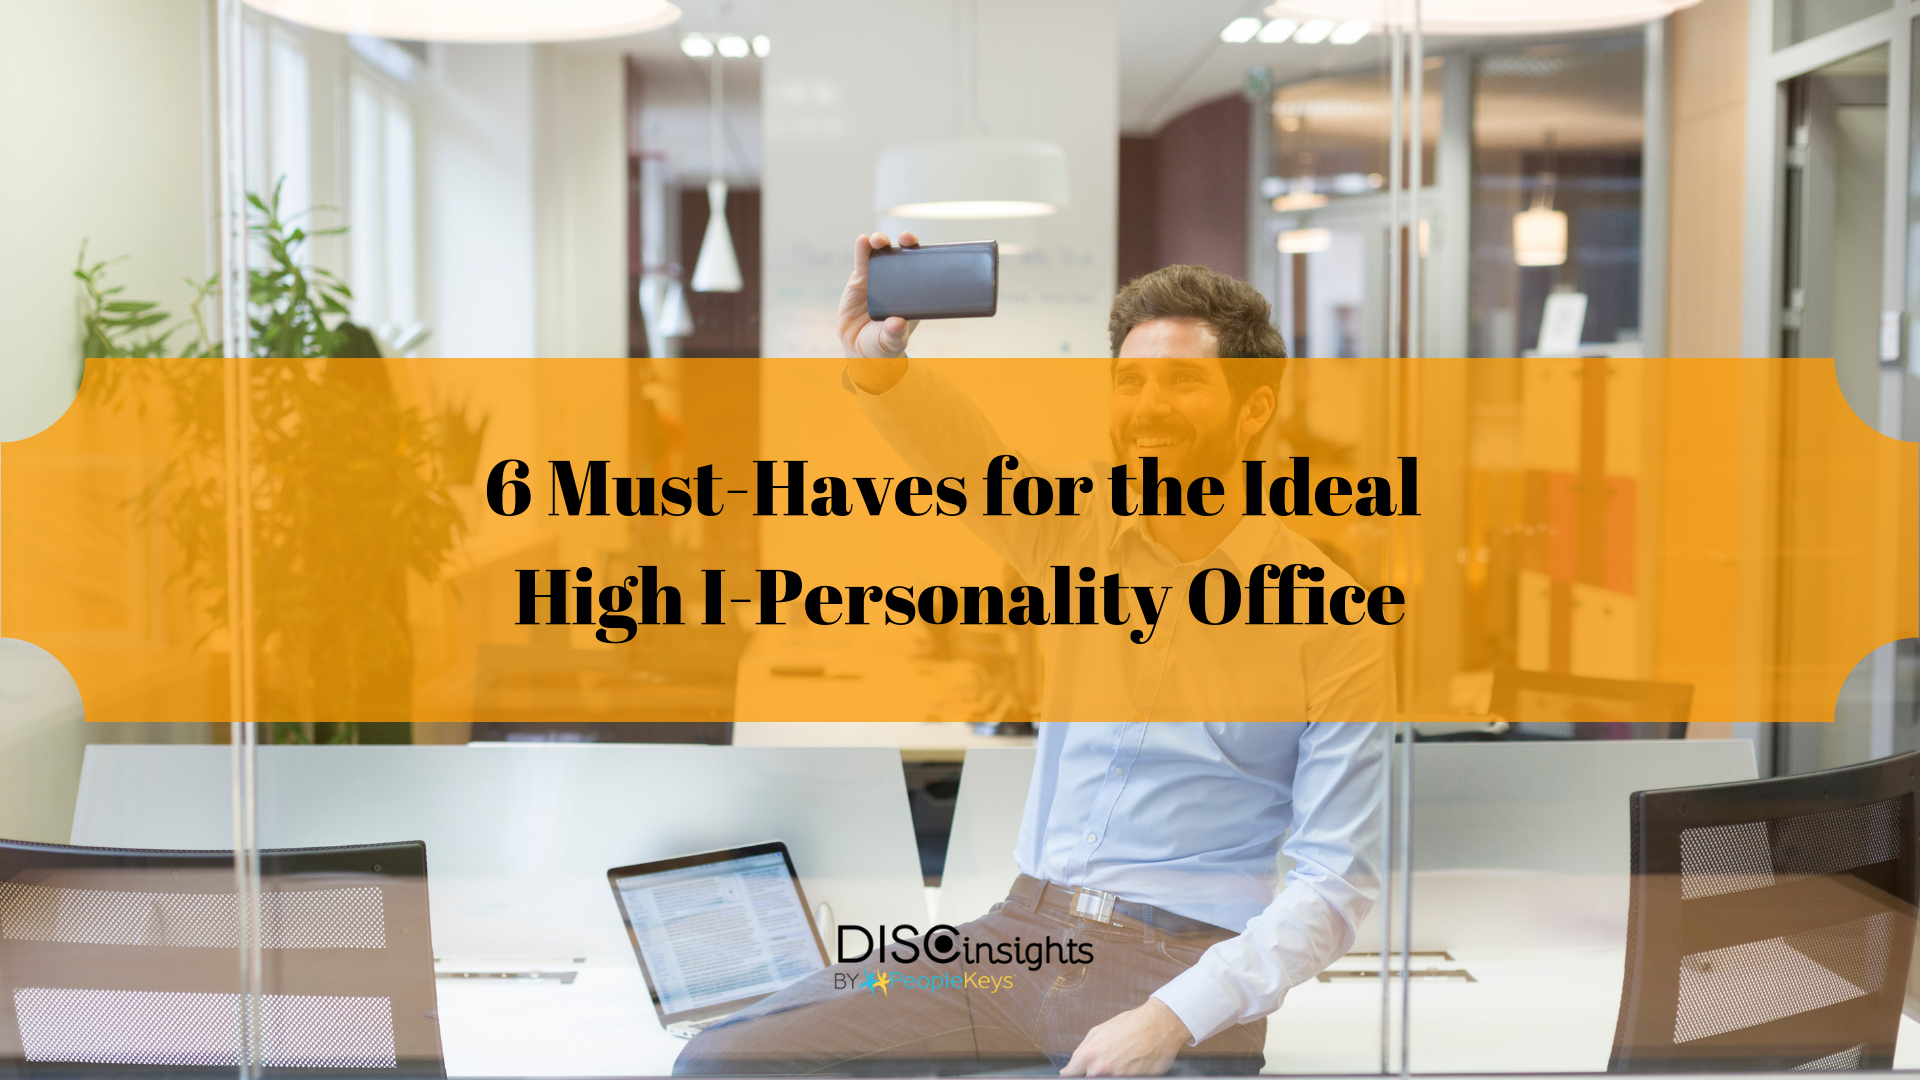 6 Must-Haves for the Ideal High I-Personality Office